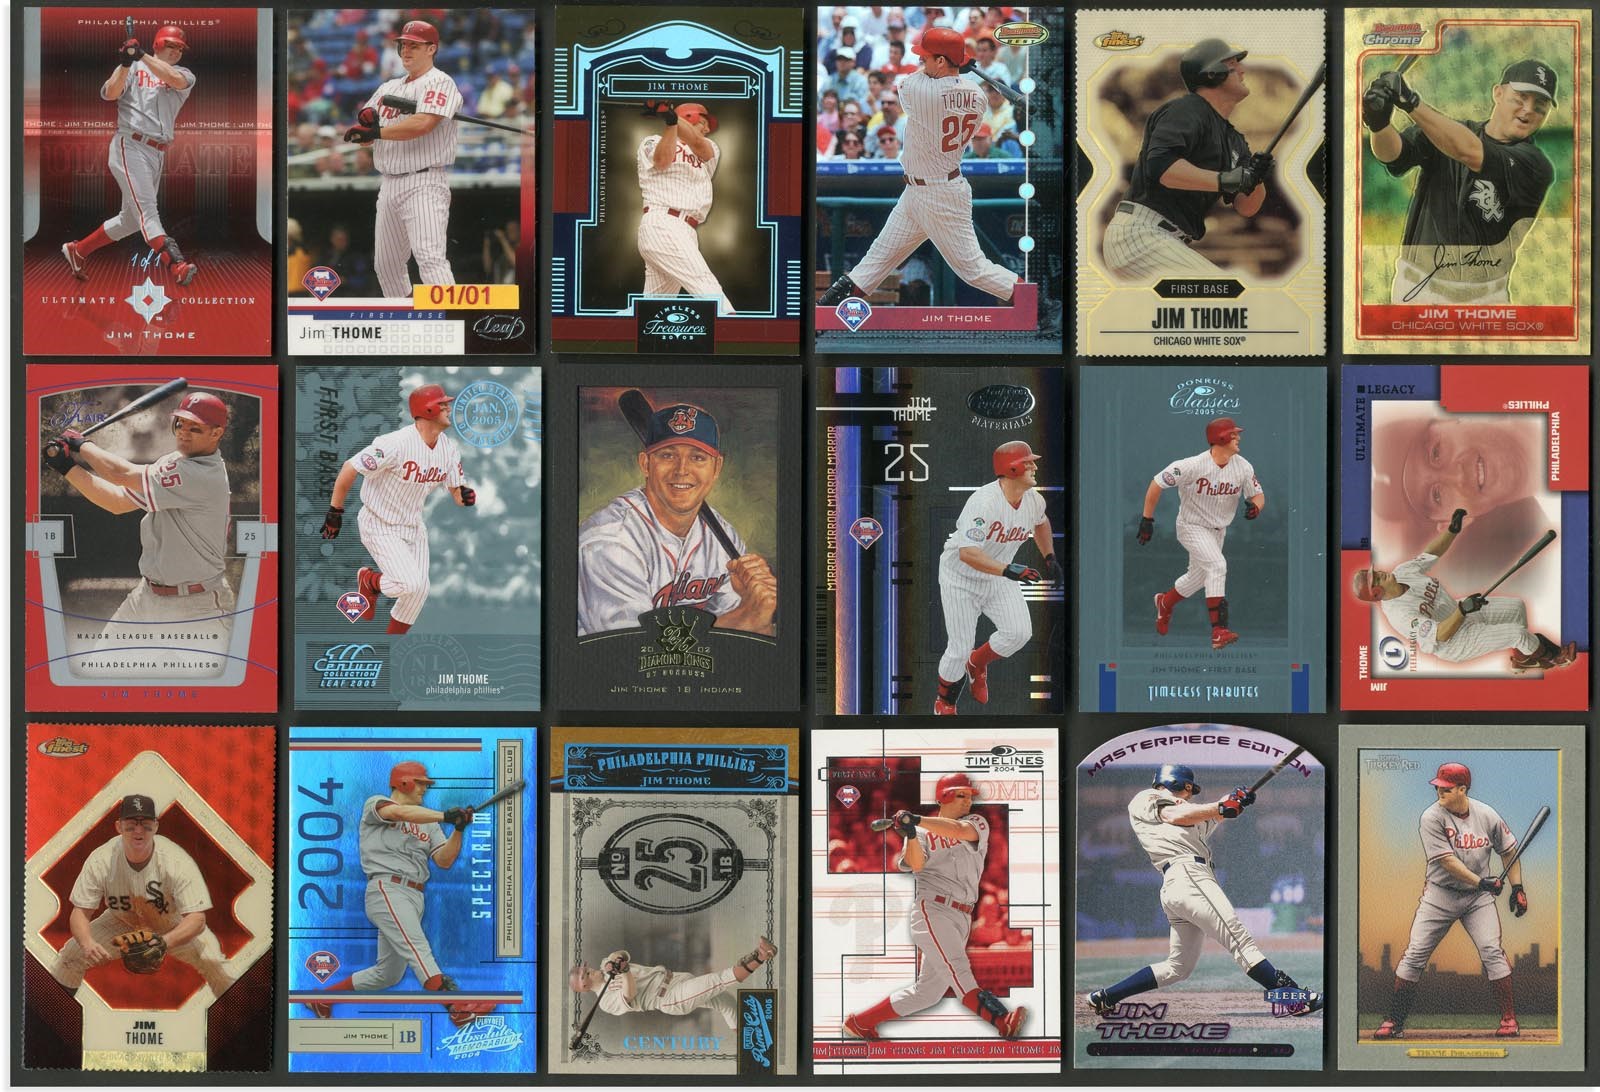 Jim Thome Master Collection - 1999-2008 Jim Thome "1 of 1" Masterpiece Collection w/Four Superfractors (40)